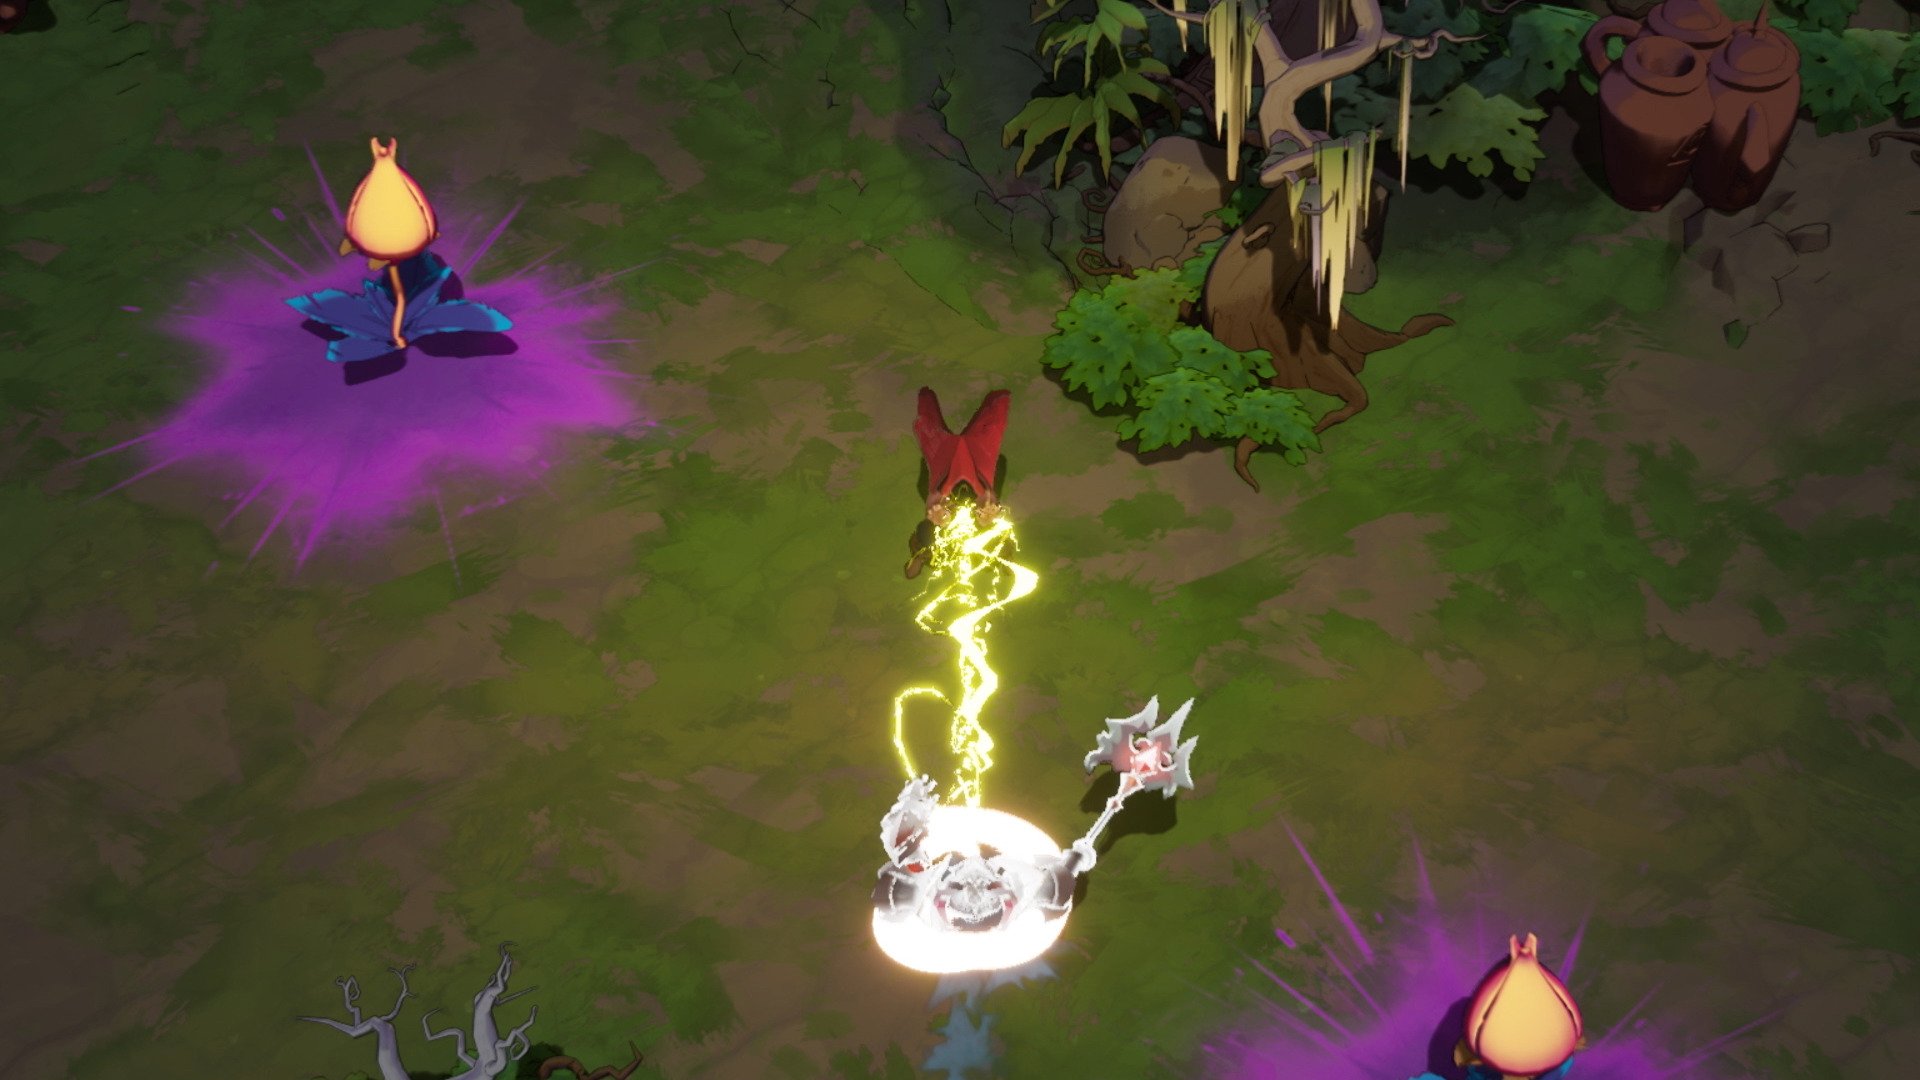 Wizard of Legend 2 Announced, Led by the Developers of Children of Morta -  Fextralife